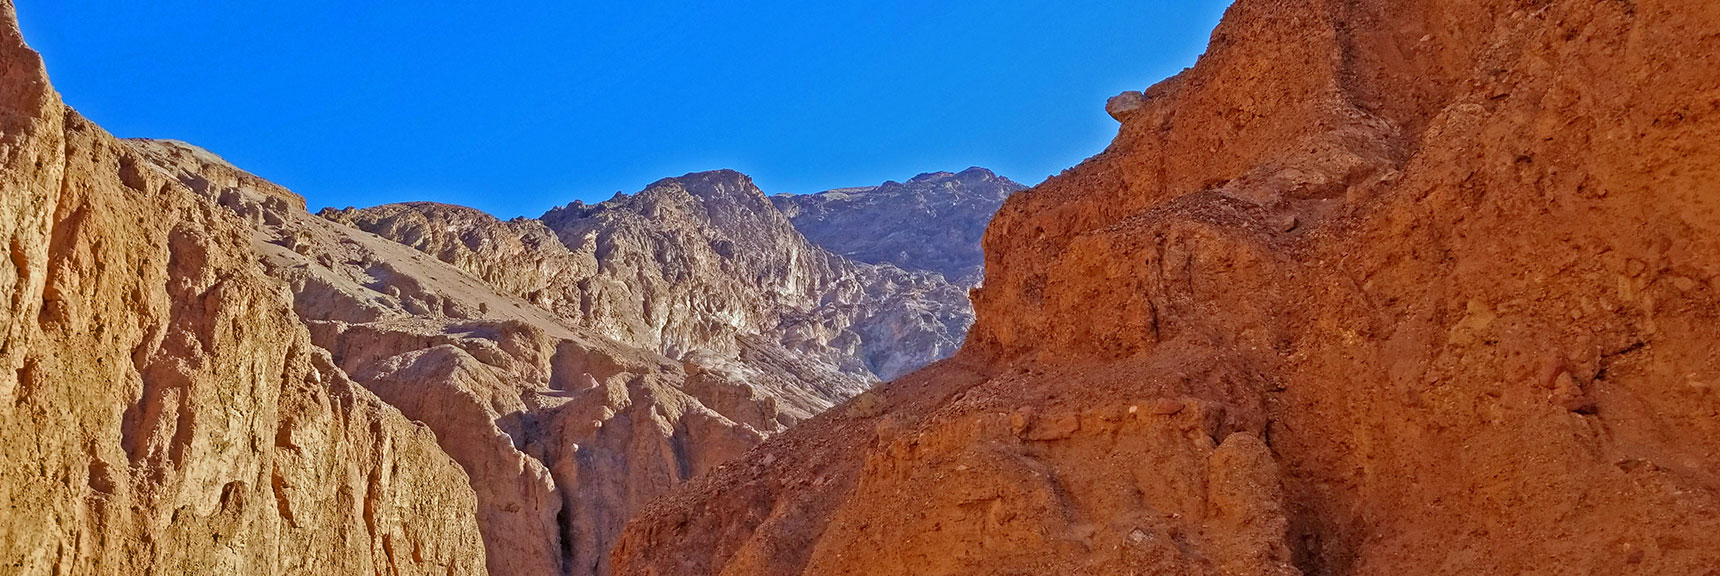 View Up Into the Black Mountains Toward Mt. Perry and Dante's Ridge | Natural Bridge Canyon | Death Valley National Park, California